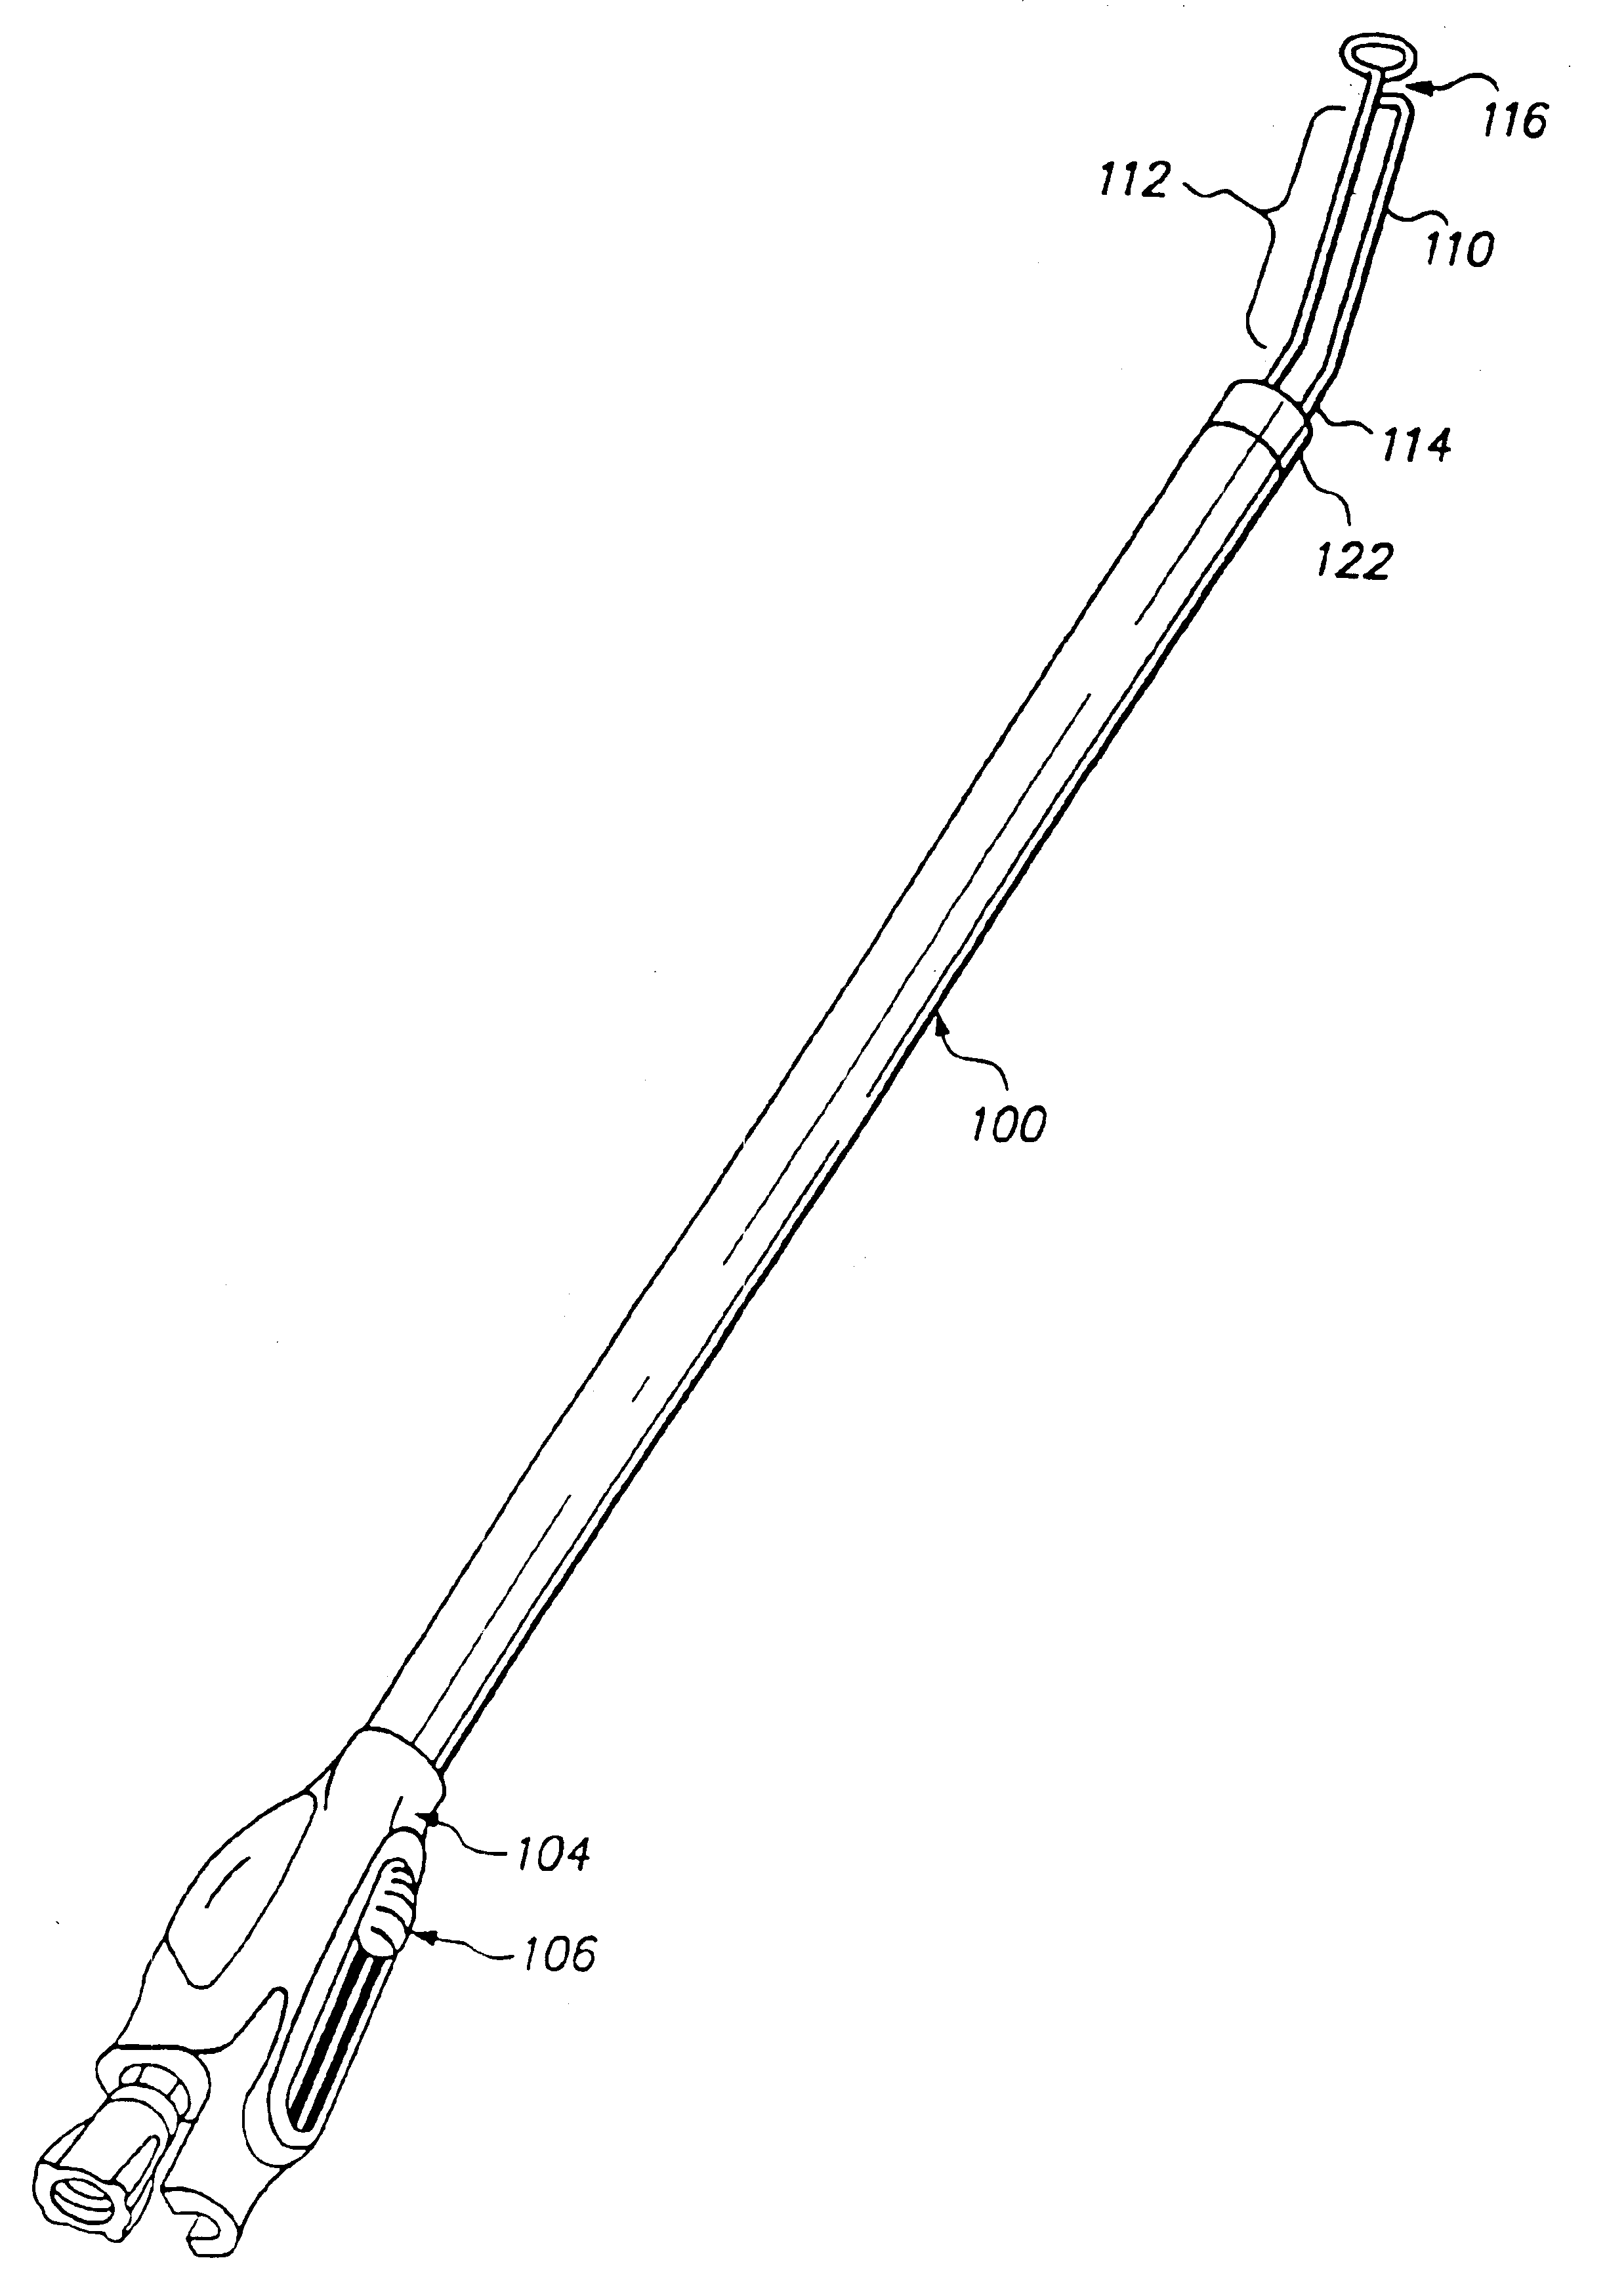 Cannula-based surgical instrument and method